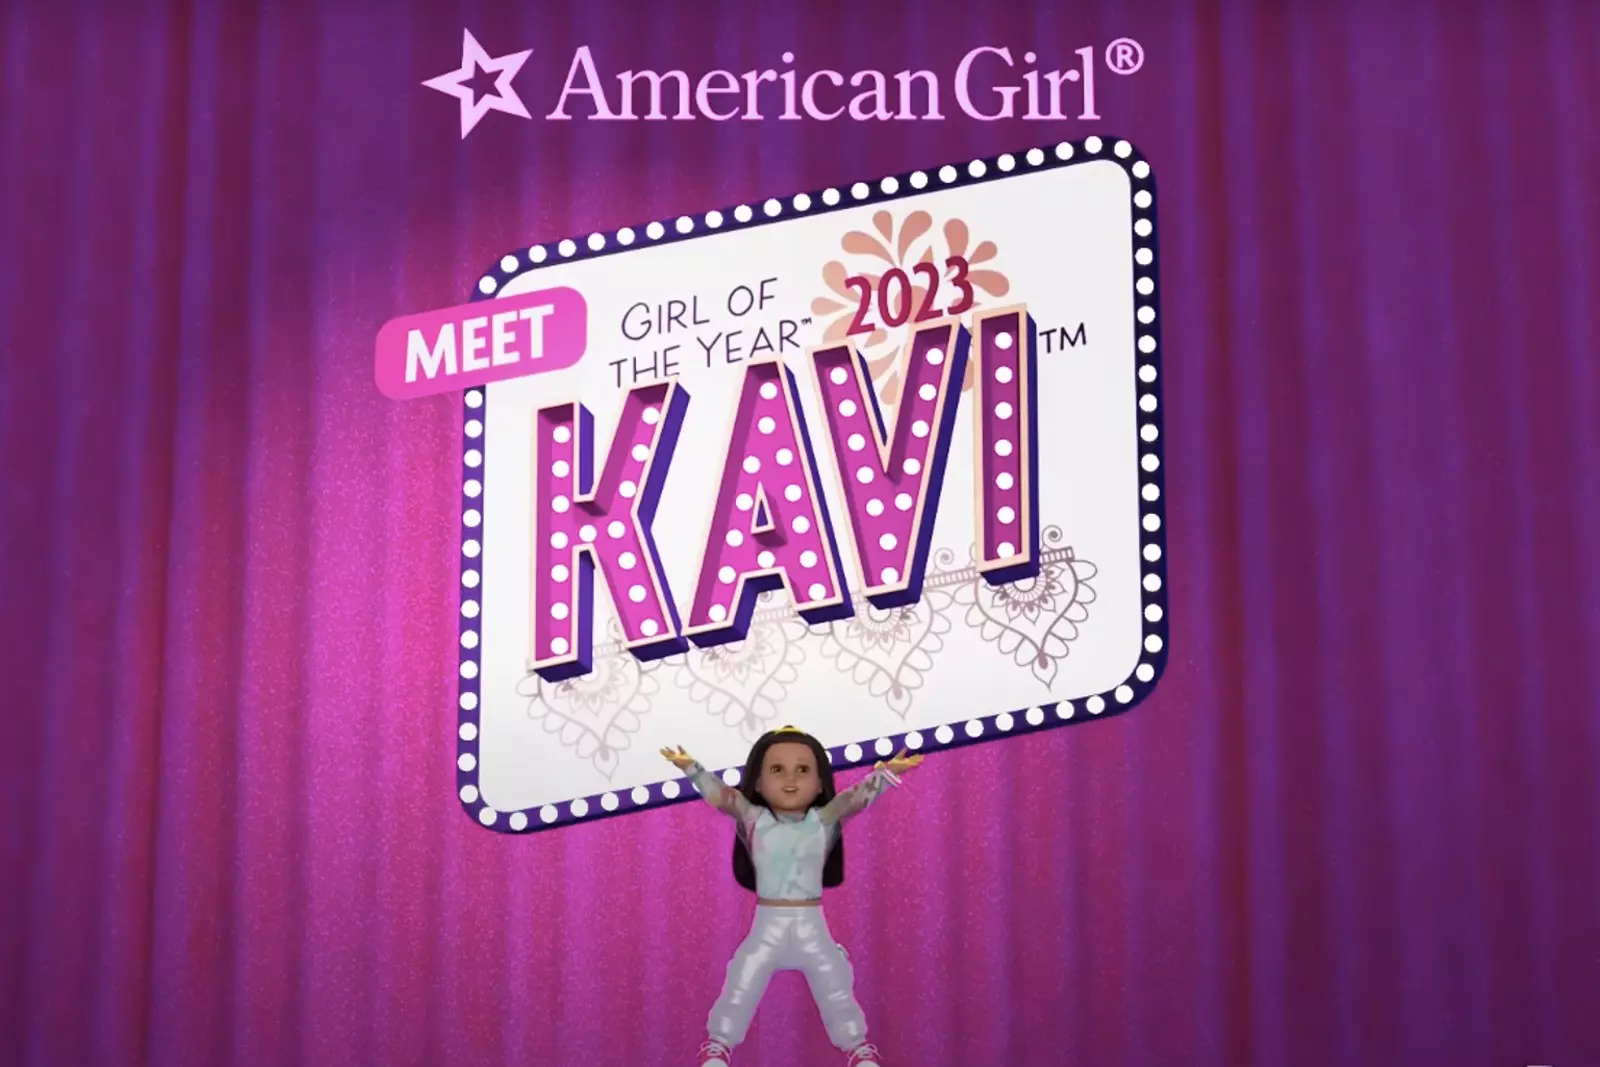 Newest American Girl doll of the year has Metuchen, NJ roots